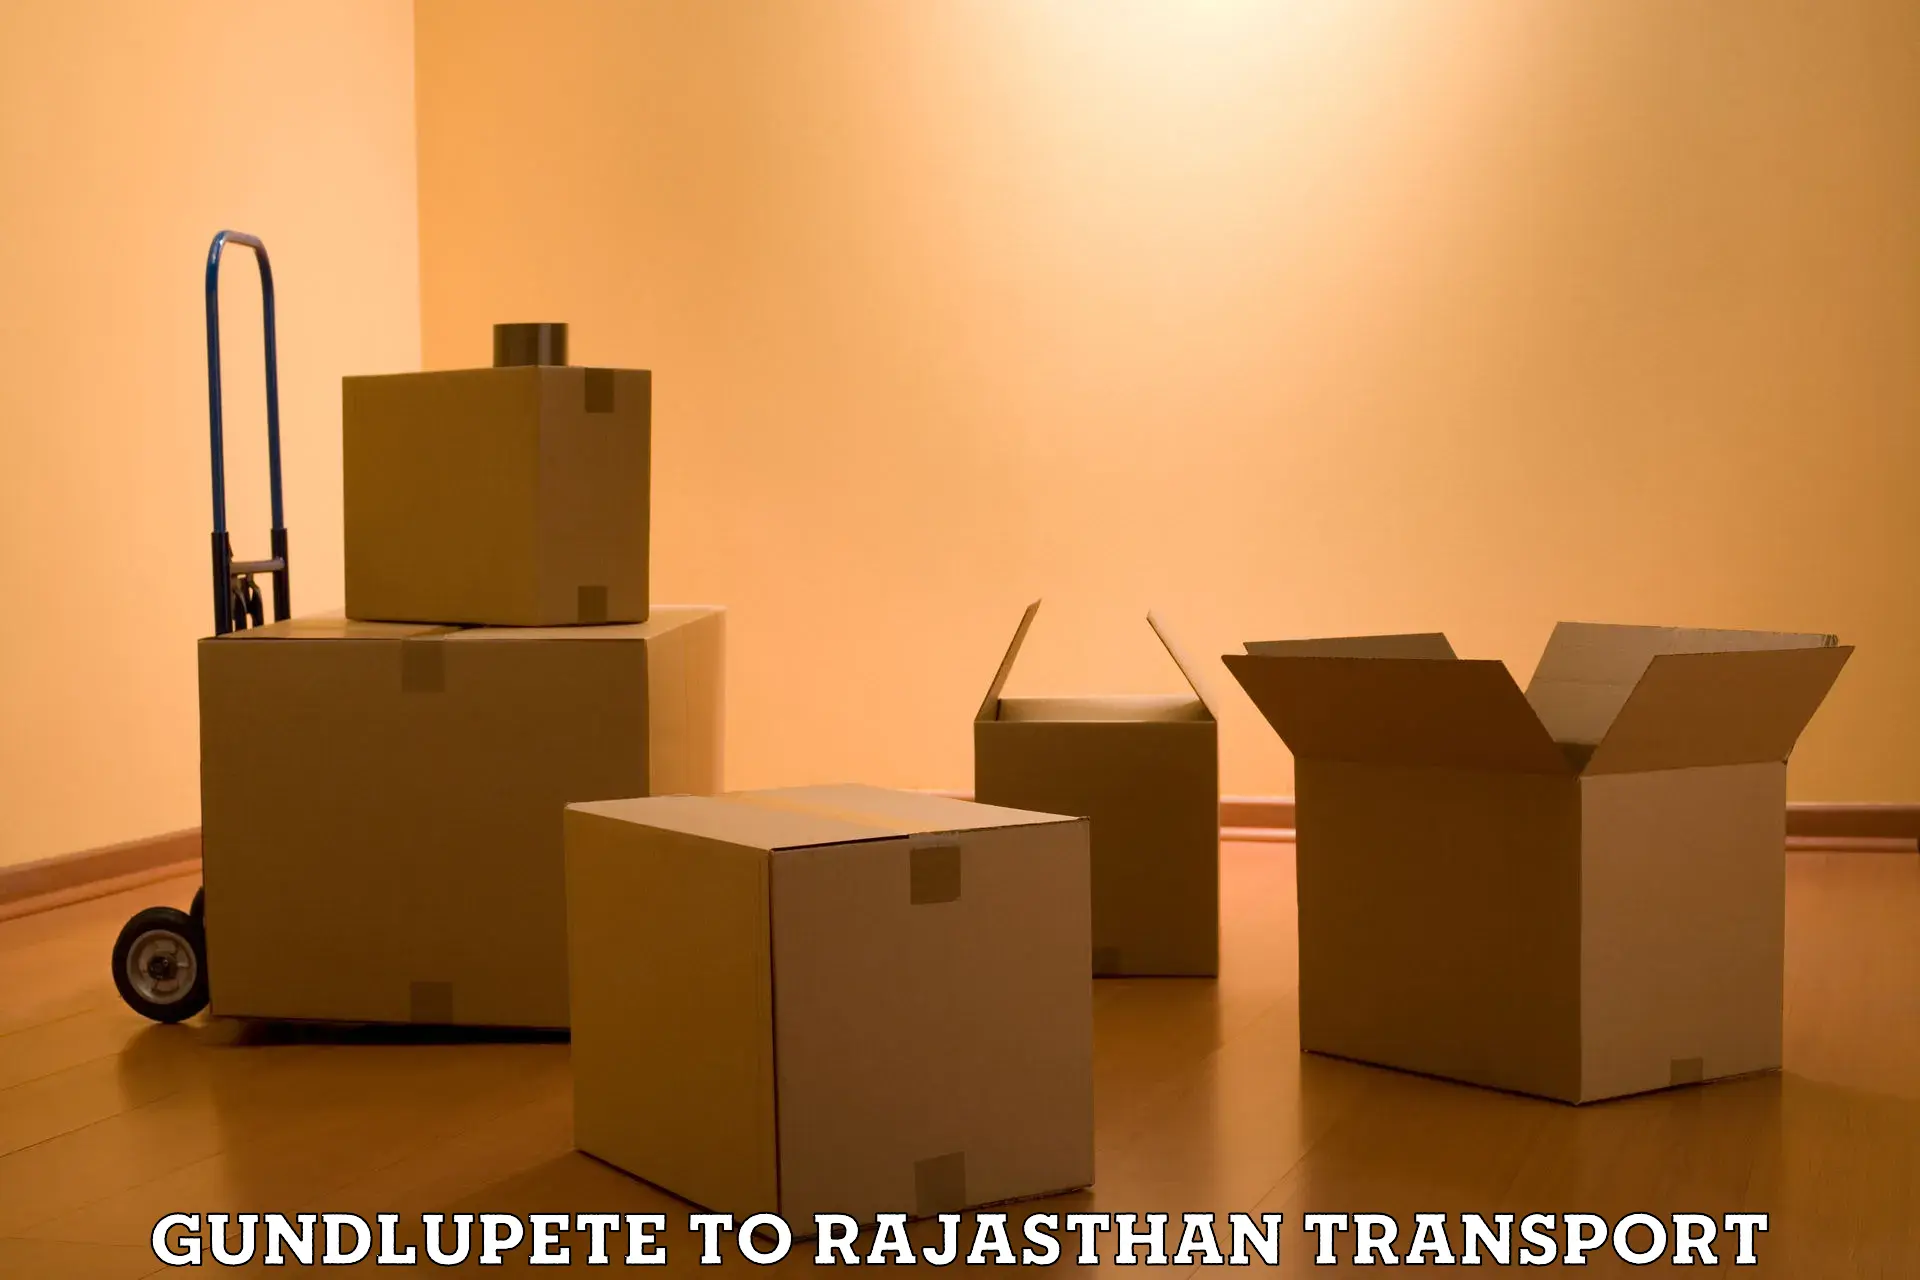 Daily transport service Gundlupete to Rajasthan